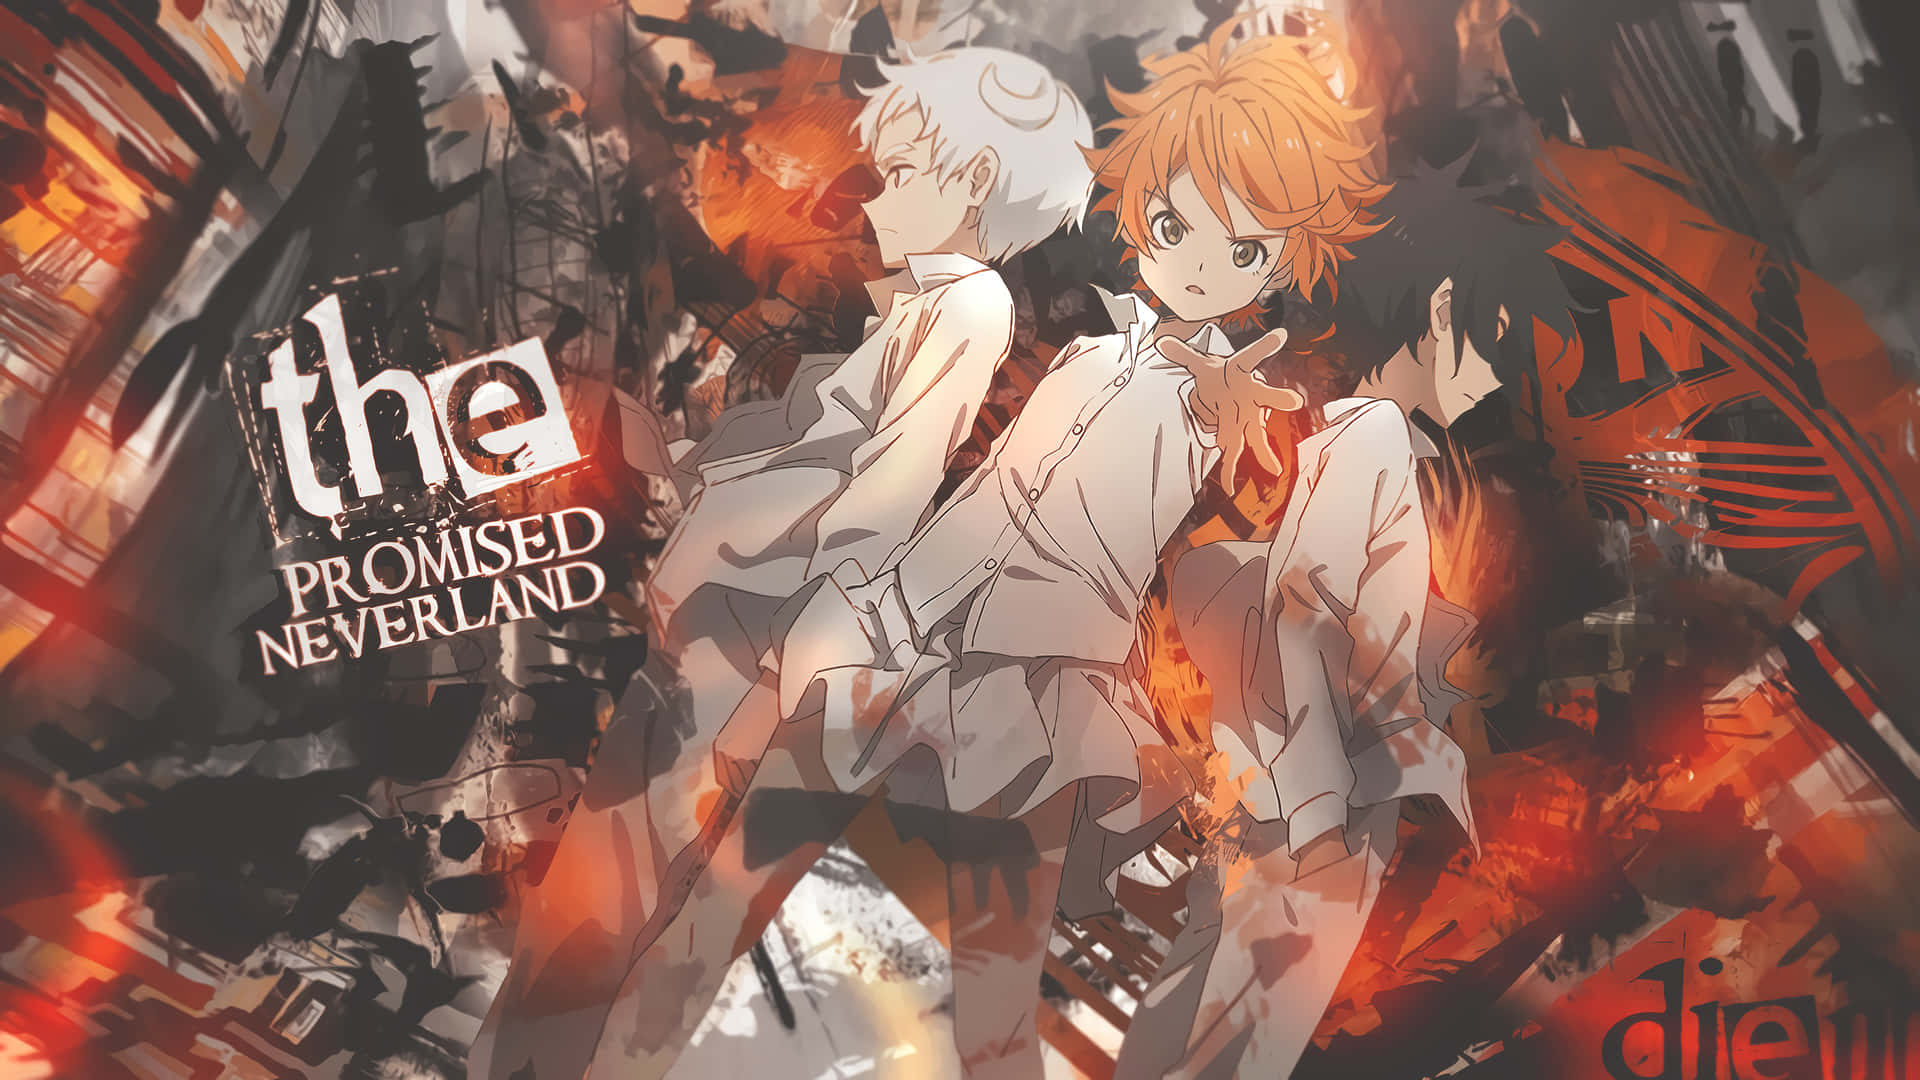 Follow Emma and the gang through their adventures in The Promised Neverland Wallpaper